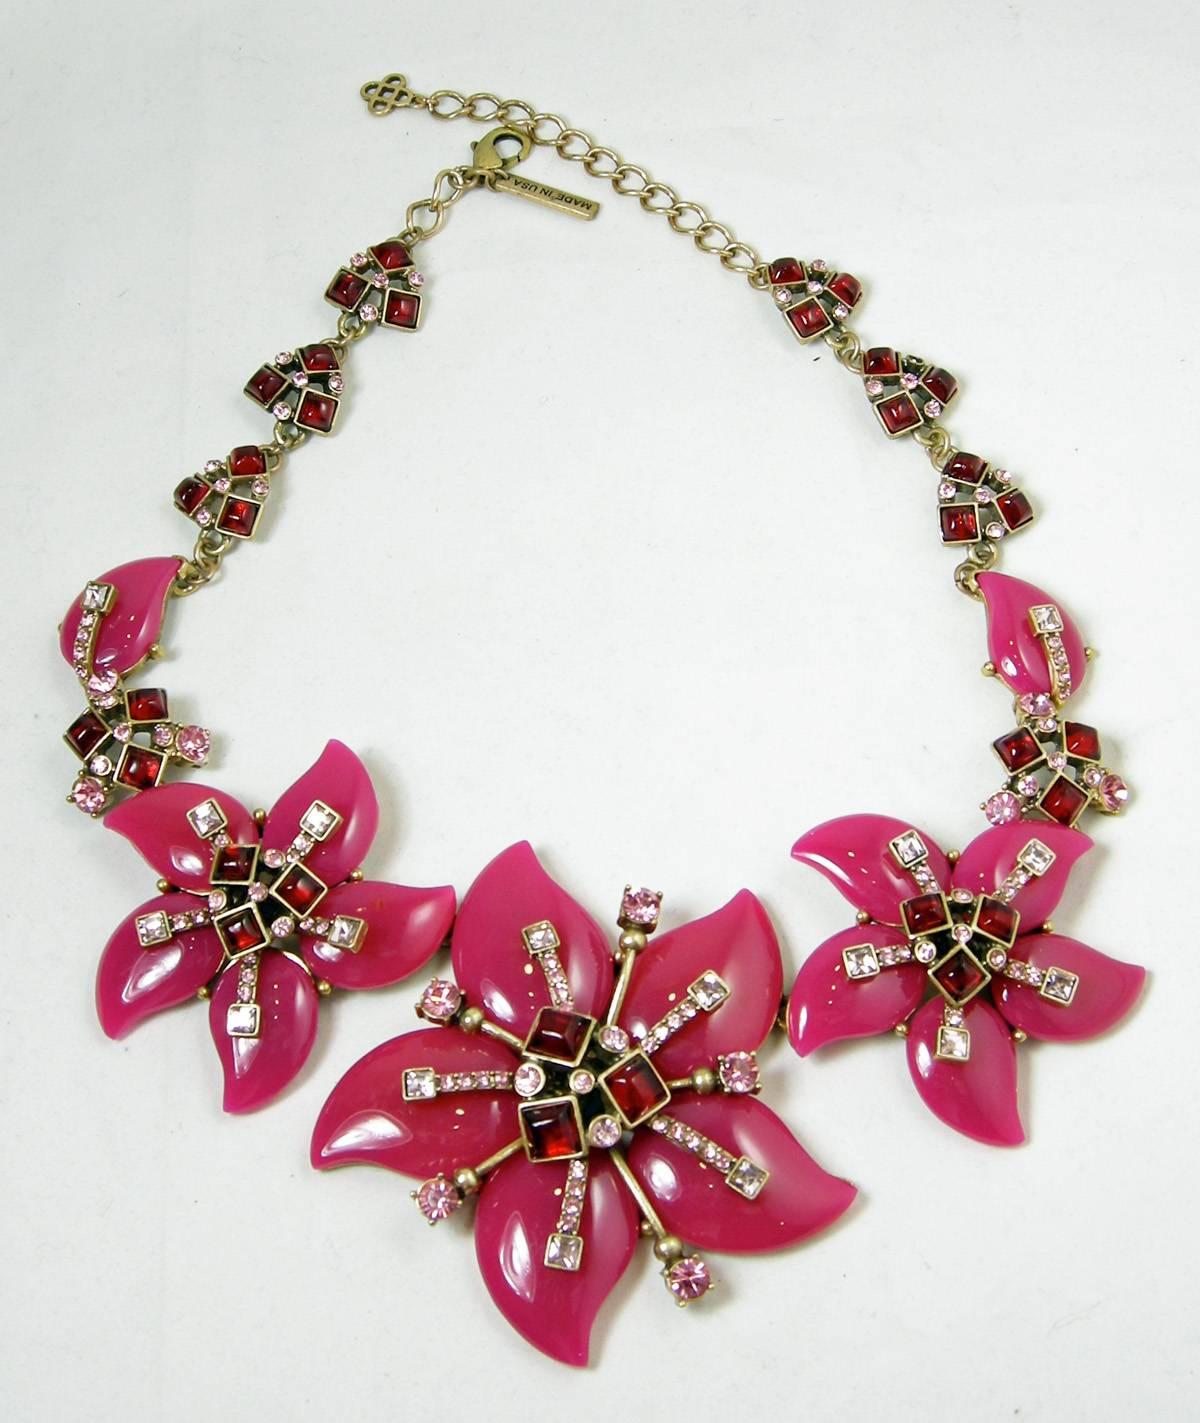 This signed Oscar de la Renta necklace features a floral design with hot pink enamel flowers that have pink and clear crystal petals in the middle of the flowers. The centers of each flower are red cabochons bezel set in a gold tone setting.  Red